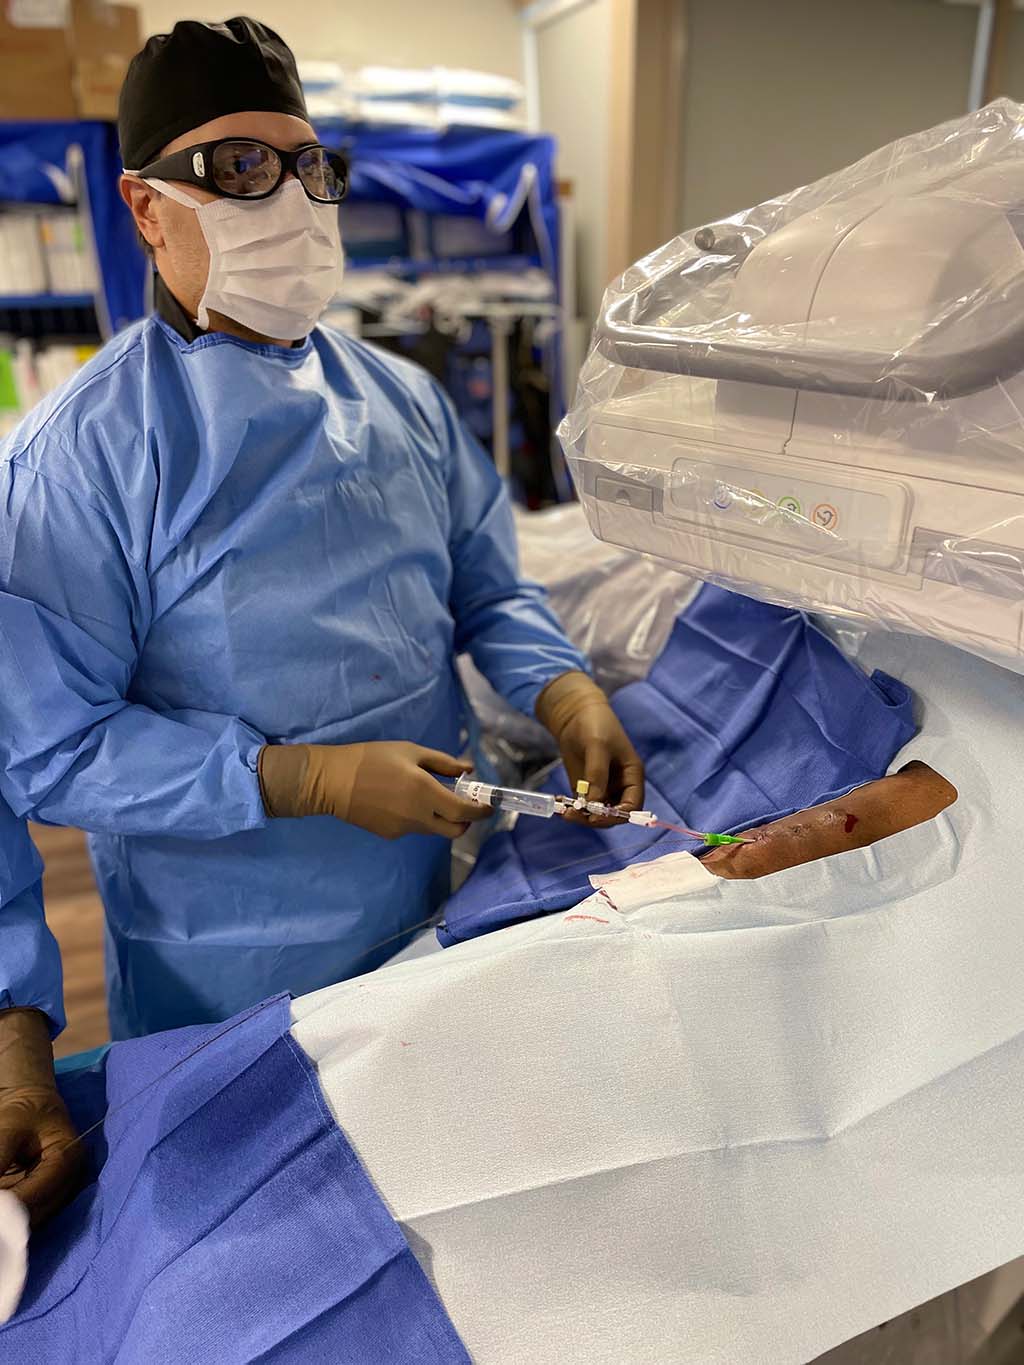 Dr. Sammy Eghbalieh performing surgery at SCMSC, an ambulatory surgical center serving Los Angeles